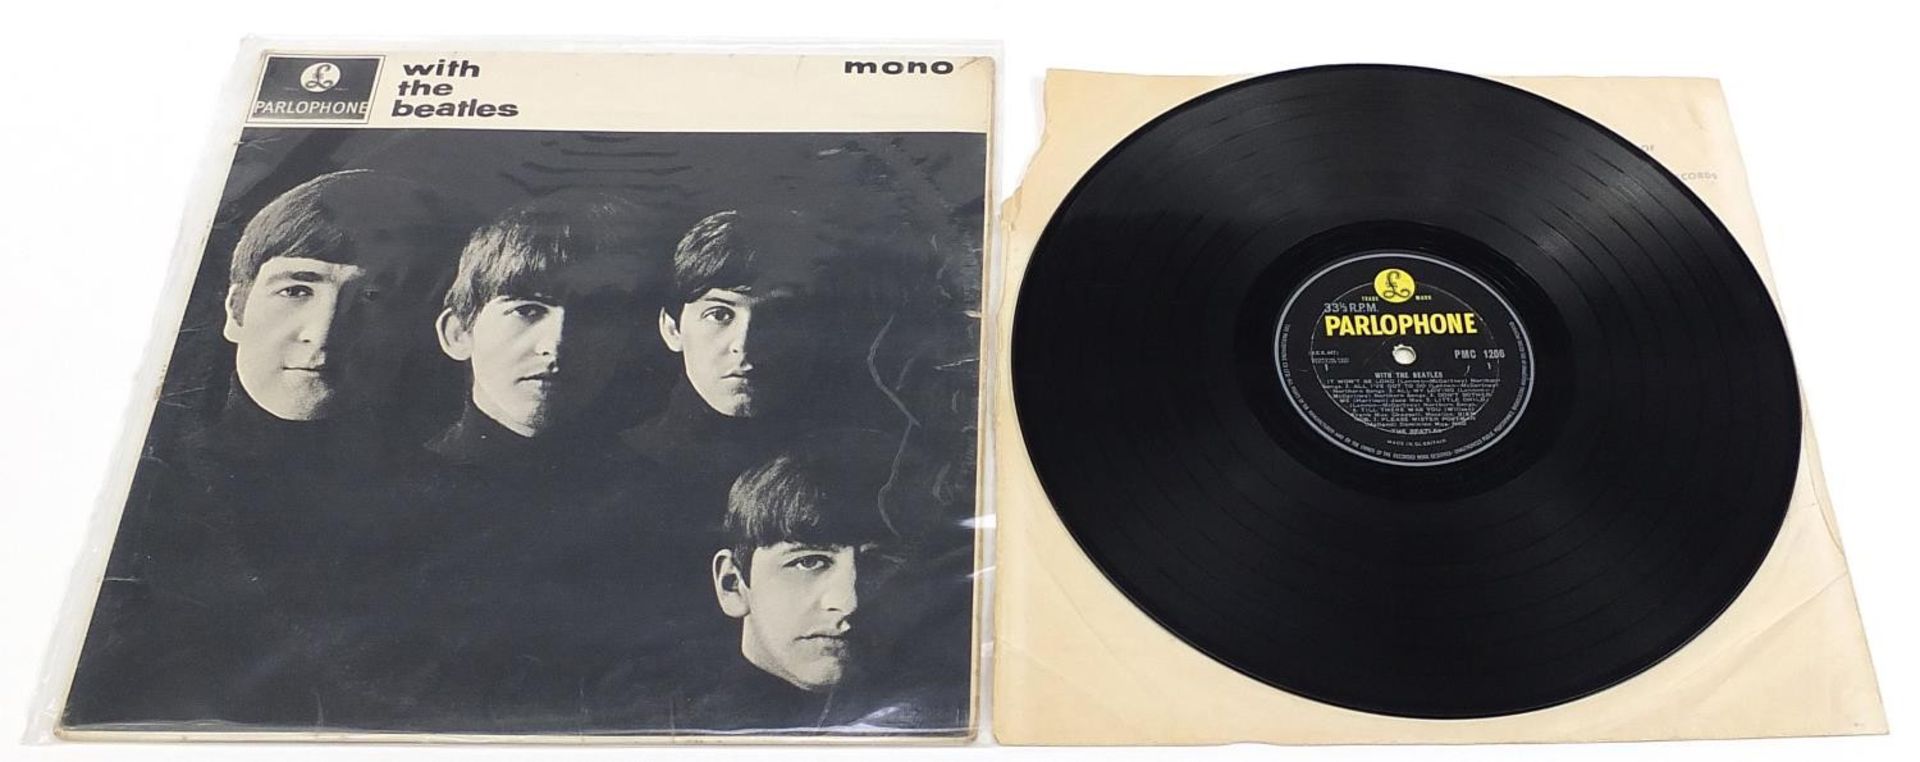 Five With the Beatles vinyl LP records by The Beatles, each mono PMC1206 - Image 10 of 11